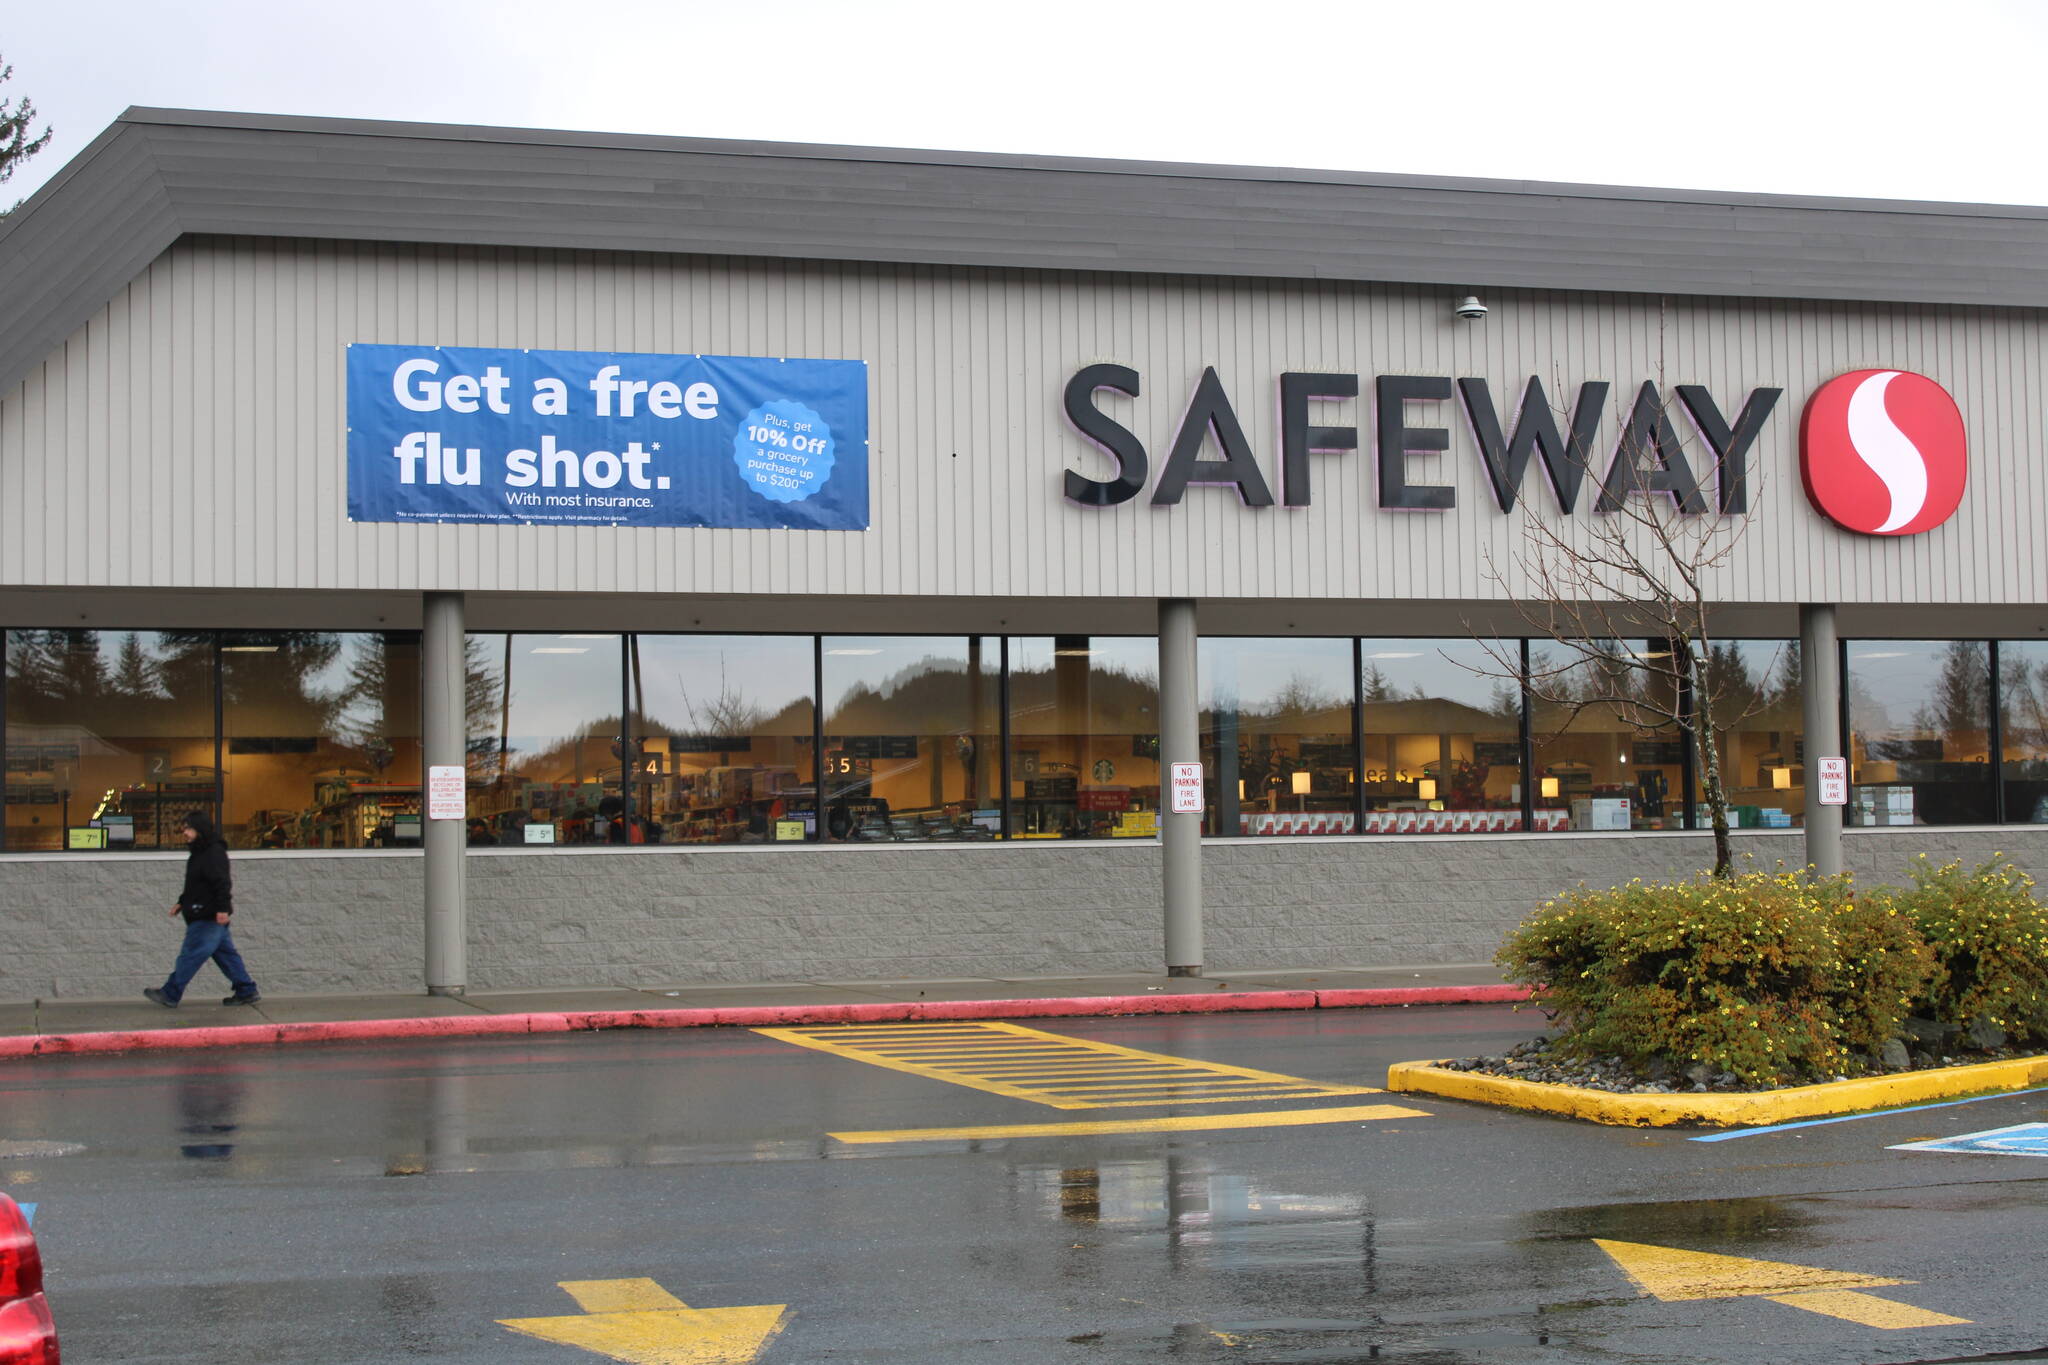 A sign outside of Safeway in the Mendenhall Valley advertises free flu shots with most insurance plans on Oct. 13. According to the sign, shoppers can earn a coupon for getting the shot at the store. Public health officials are urging all eligible Alaskans to get the shot by the end of the month to help make sure health care resources are available for COVID-19 patients. (Dana Zigmund/Juneau Empire)